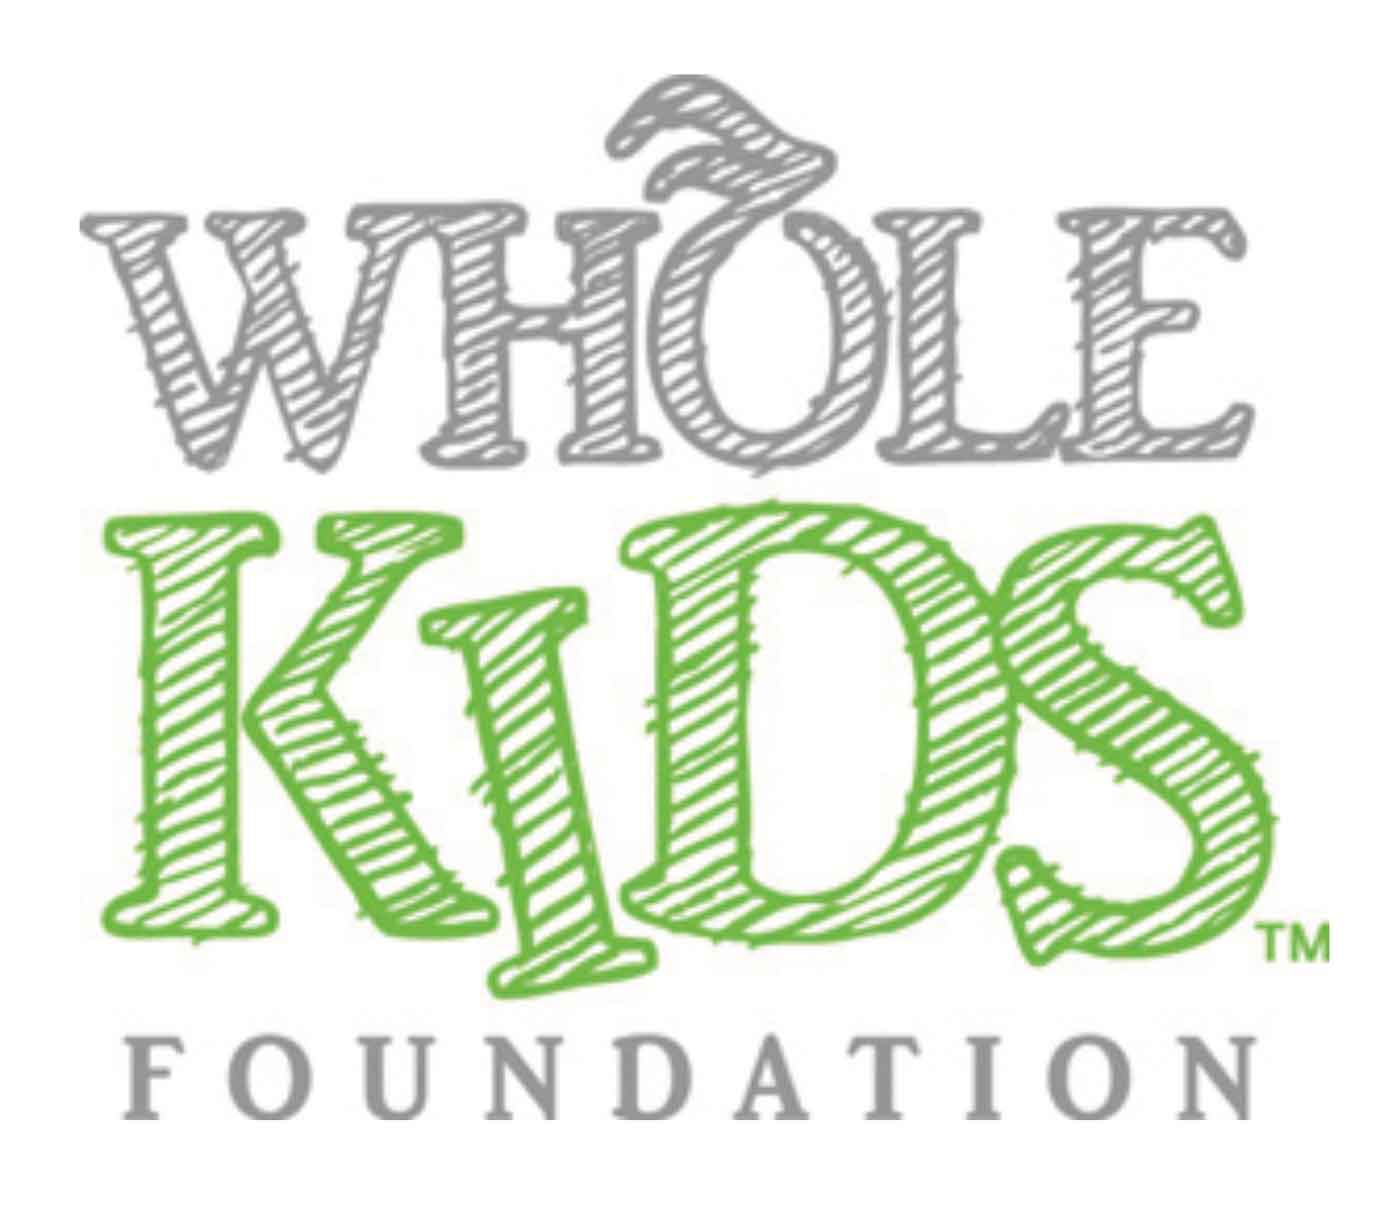 with each purchase whole foods kid gets a donation from whim